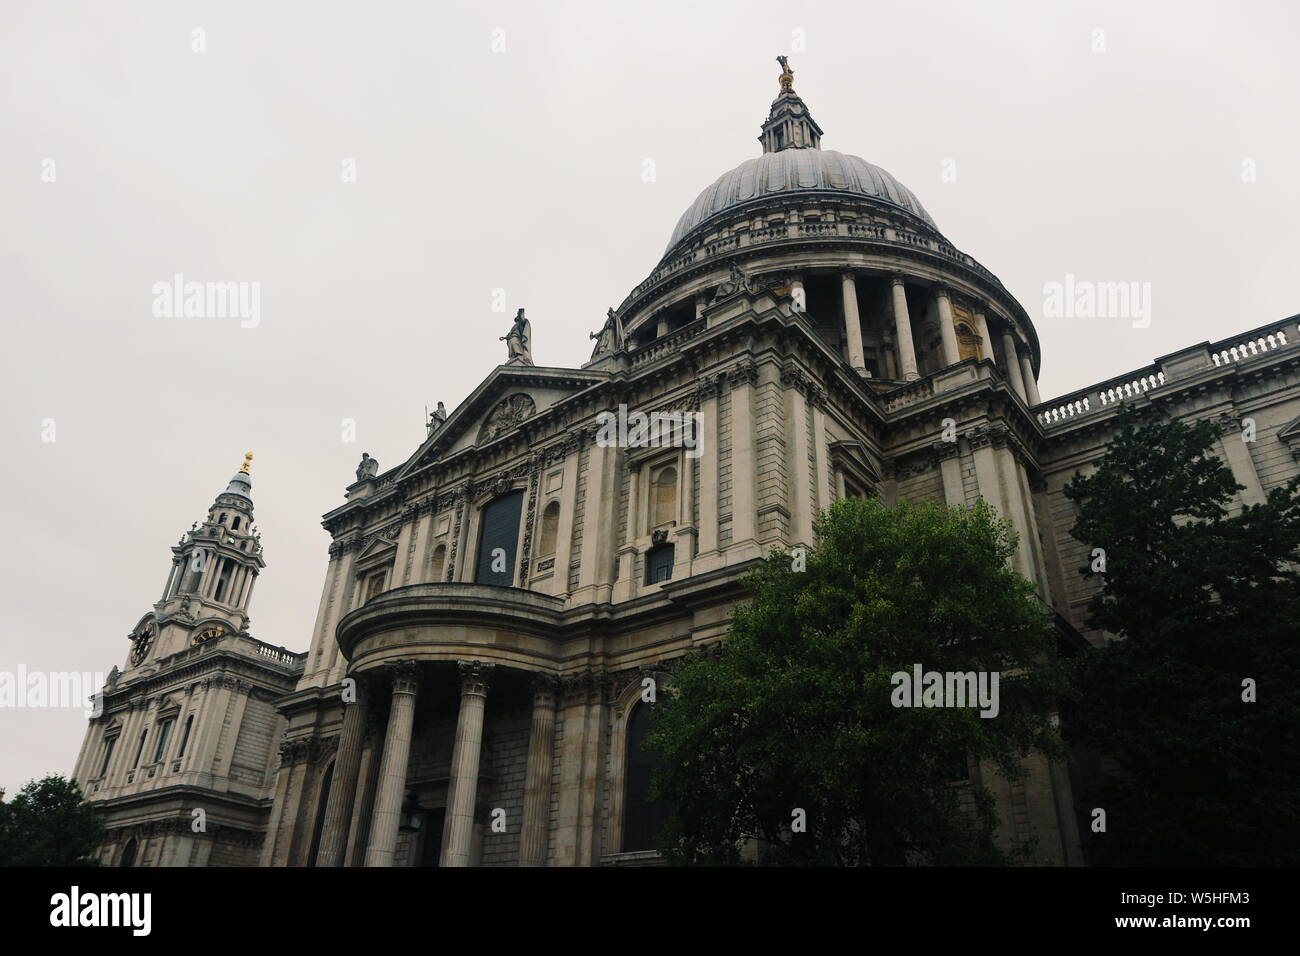 The St. Paul's Cathedral in London, UK shot in a low-angle perspective. Stock Photo